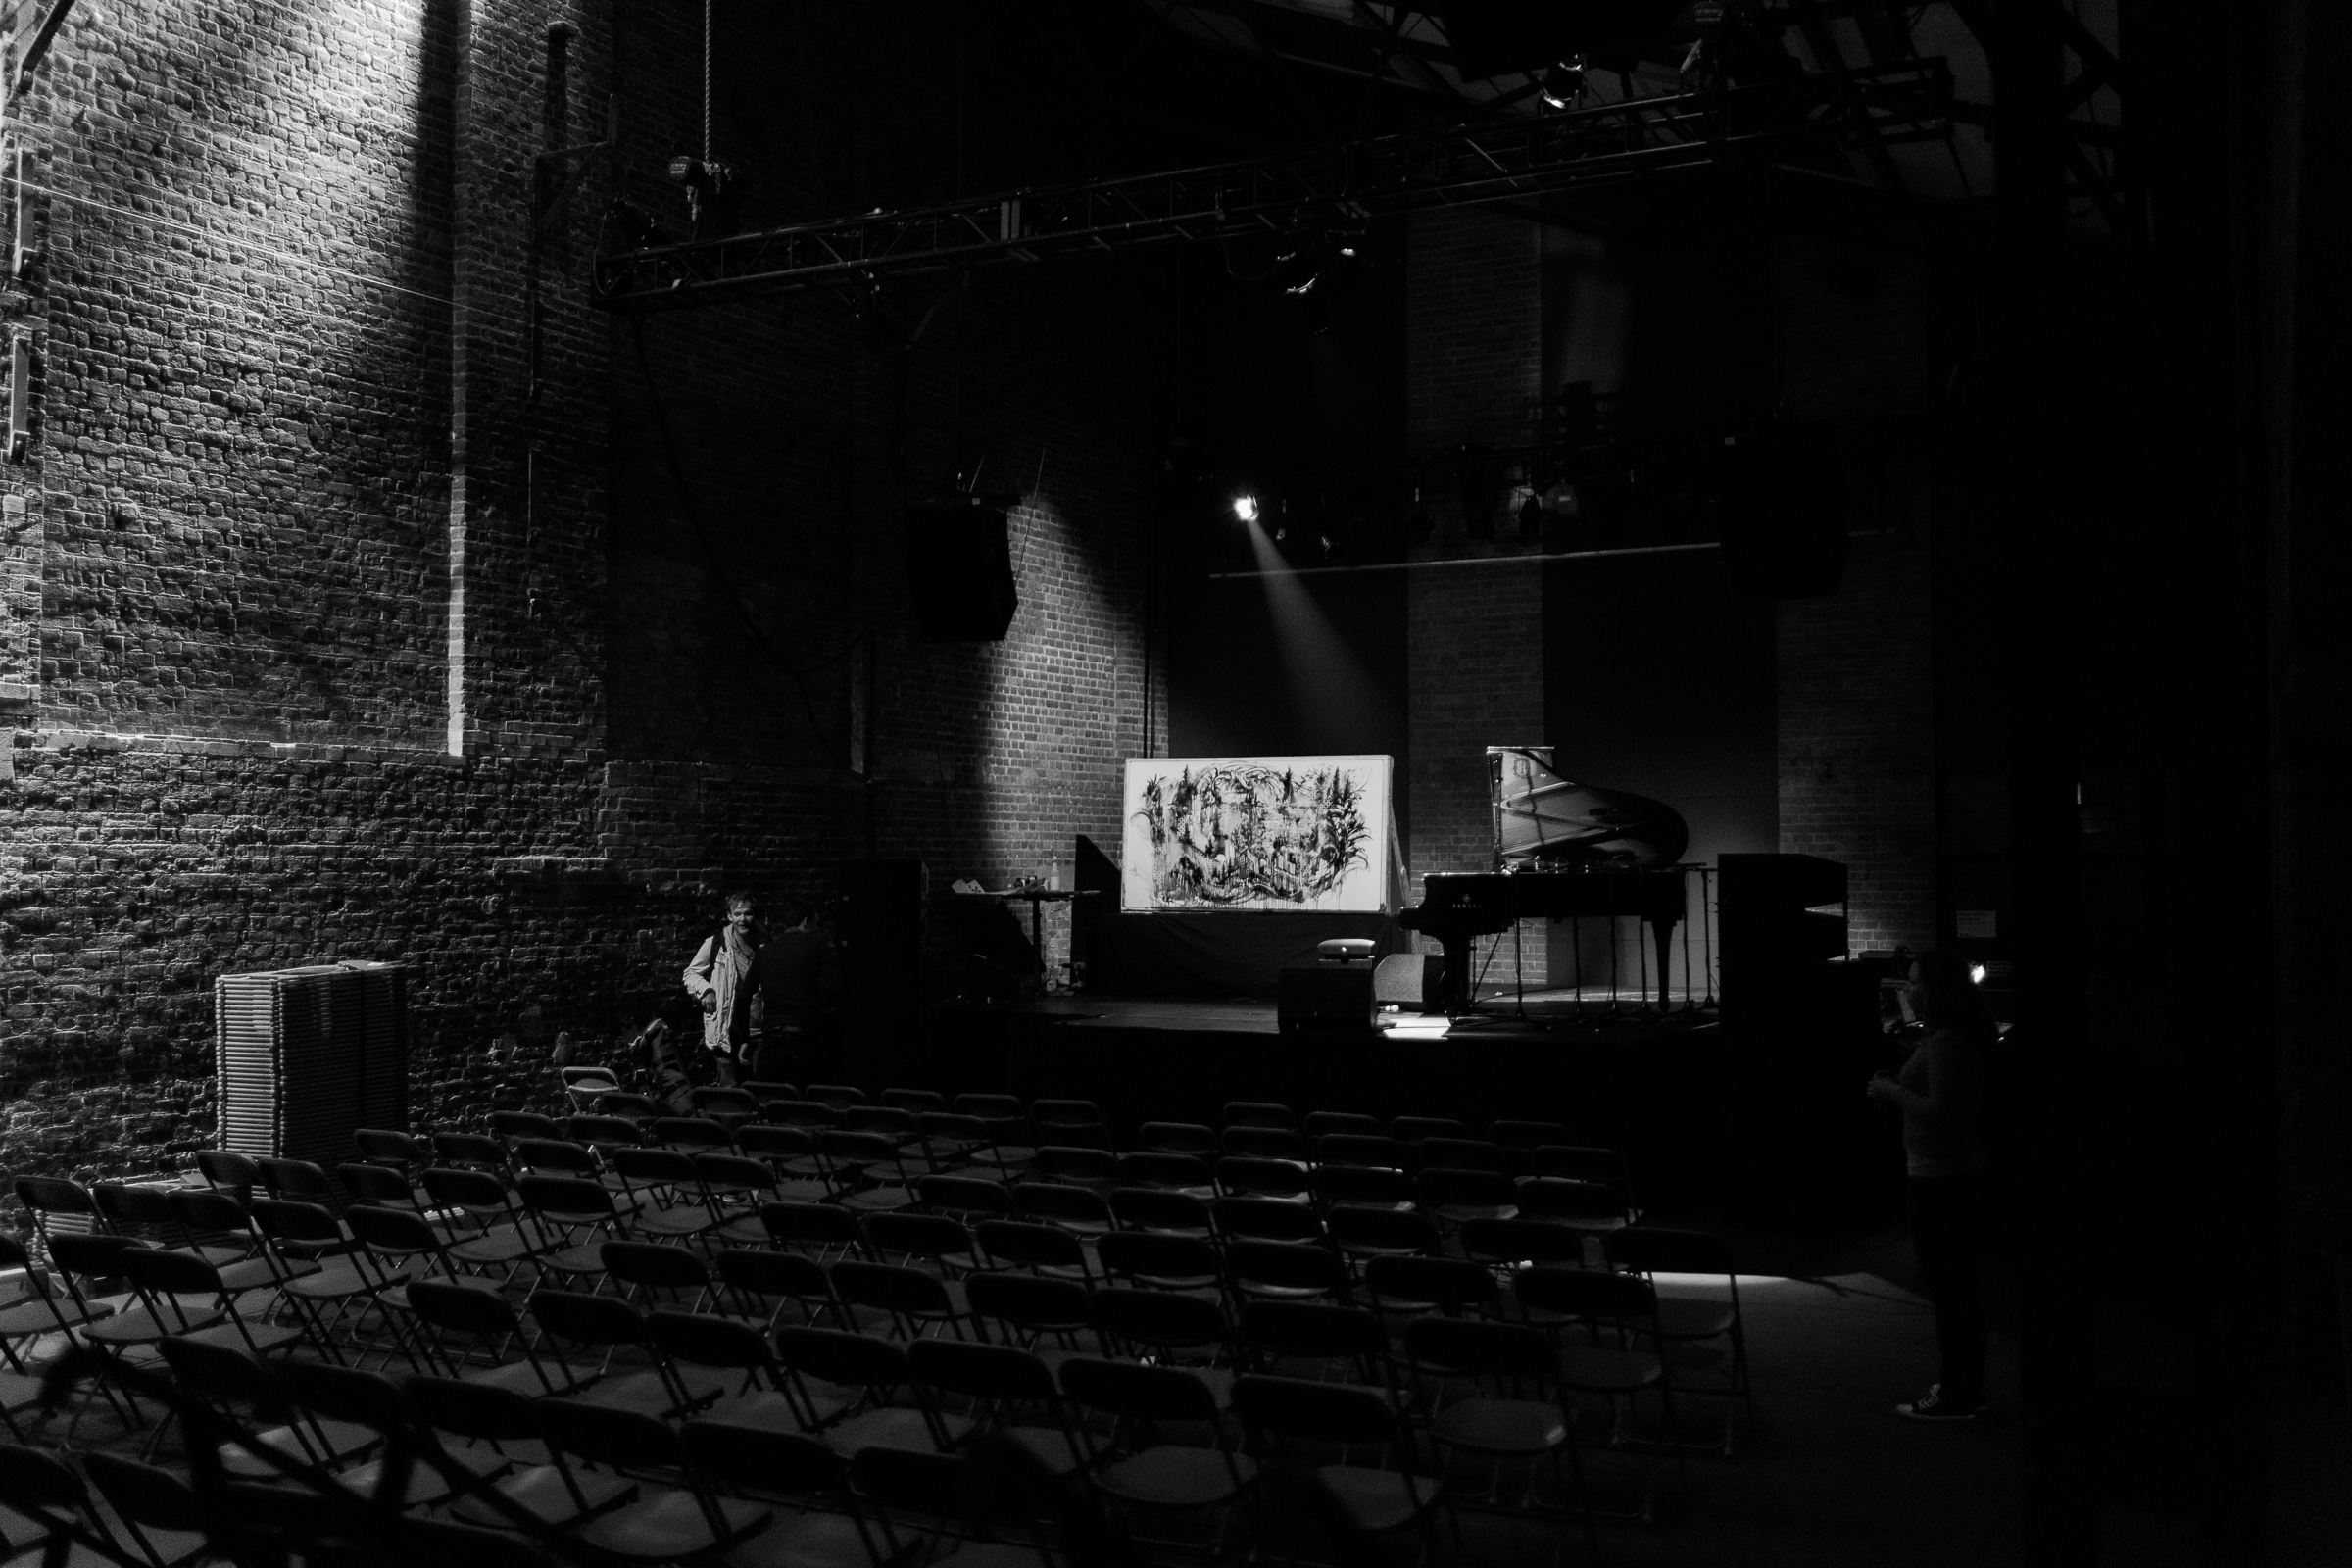 An almost empty venue, the Village Underground. Gregory Euclide's finished painting is in the light next to Lubomyr Melnyk's piano.